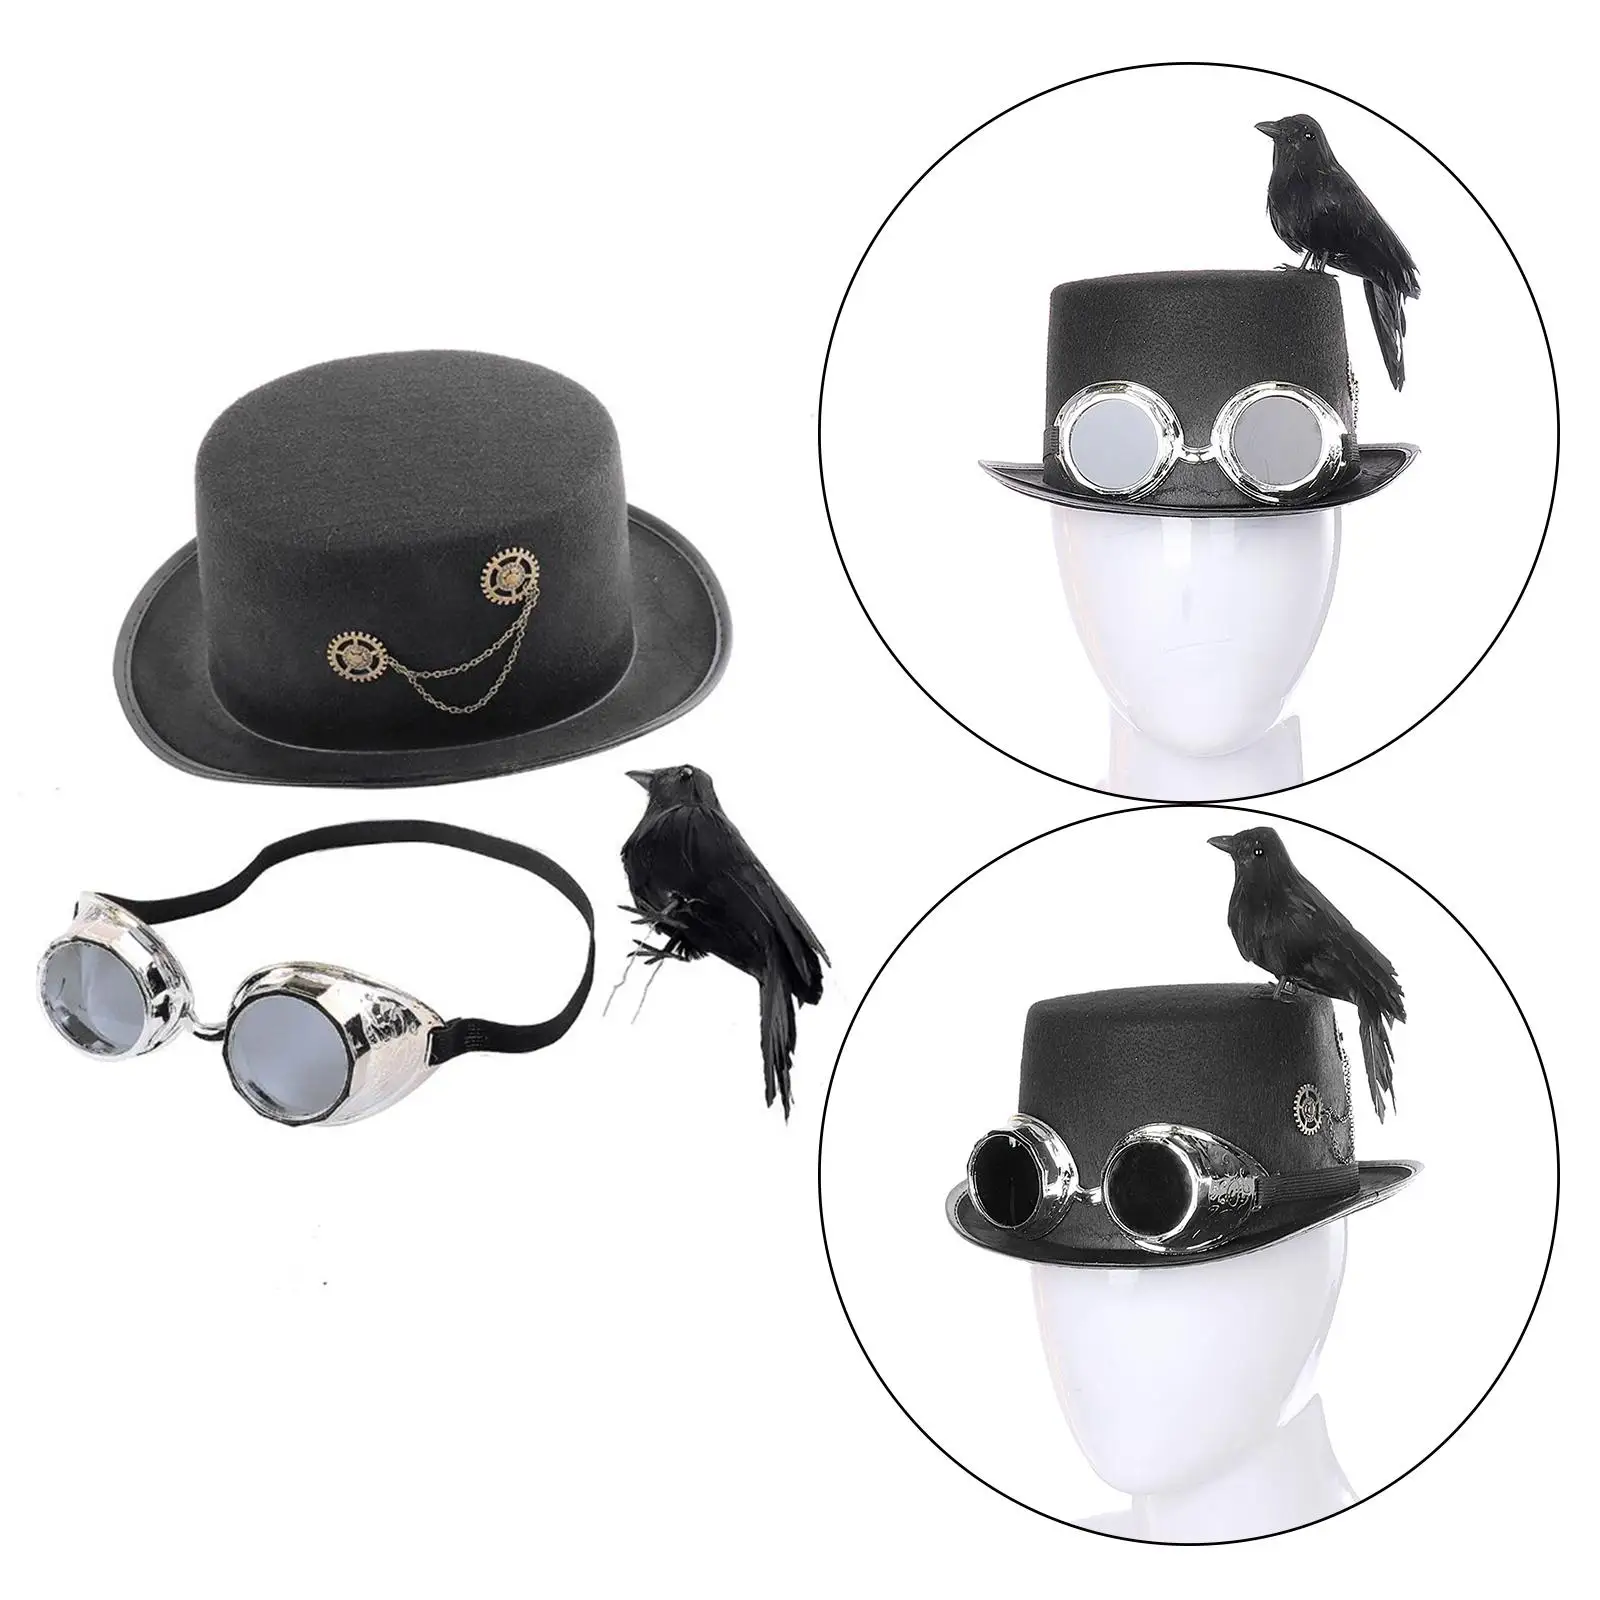 Deluxe Black Steampunk Top Hat with Goggles Formal Vintage Hat for Dress up